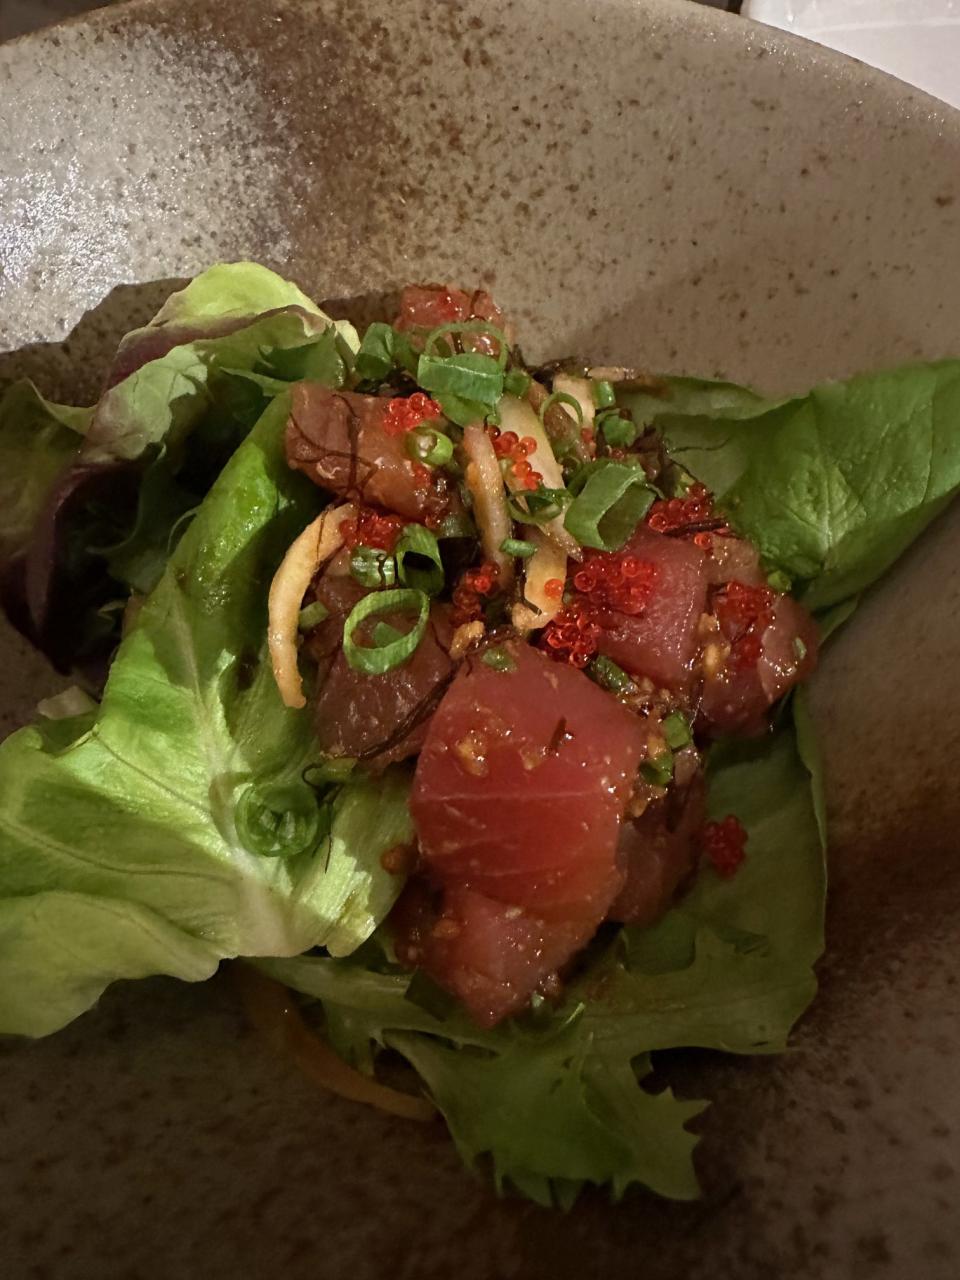 The poke bowl, finely-diced raw tuna in a bed of lettuce and rice with other fixings, is one of the staples of the Hawaiian culinary tradition. (Adam Schupak/Golfweek)